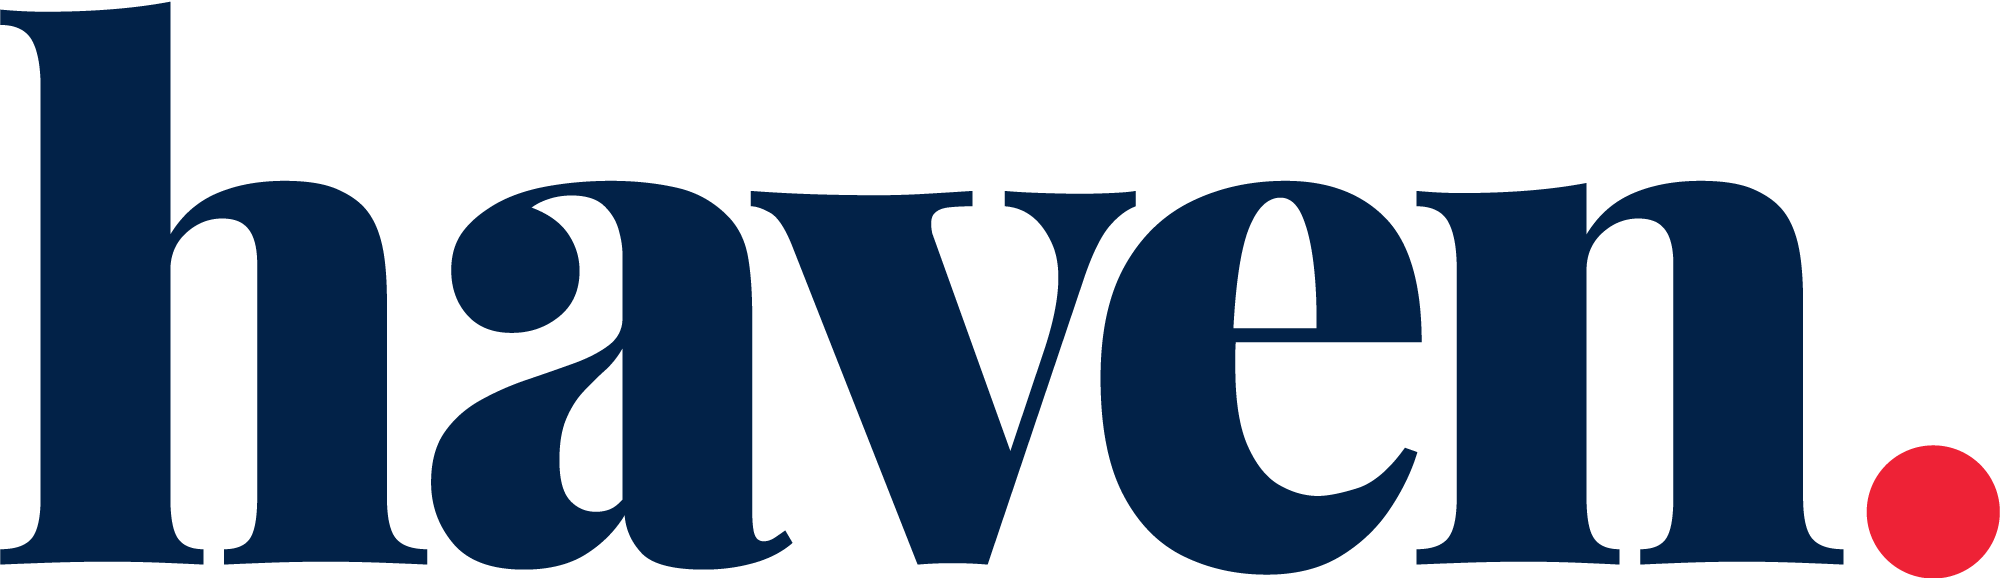 Haven Residential Company Logo